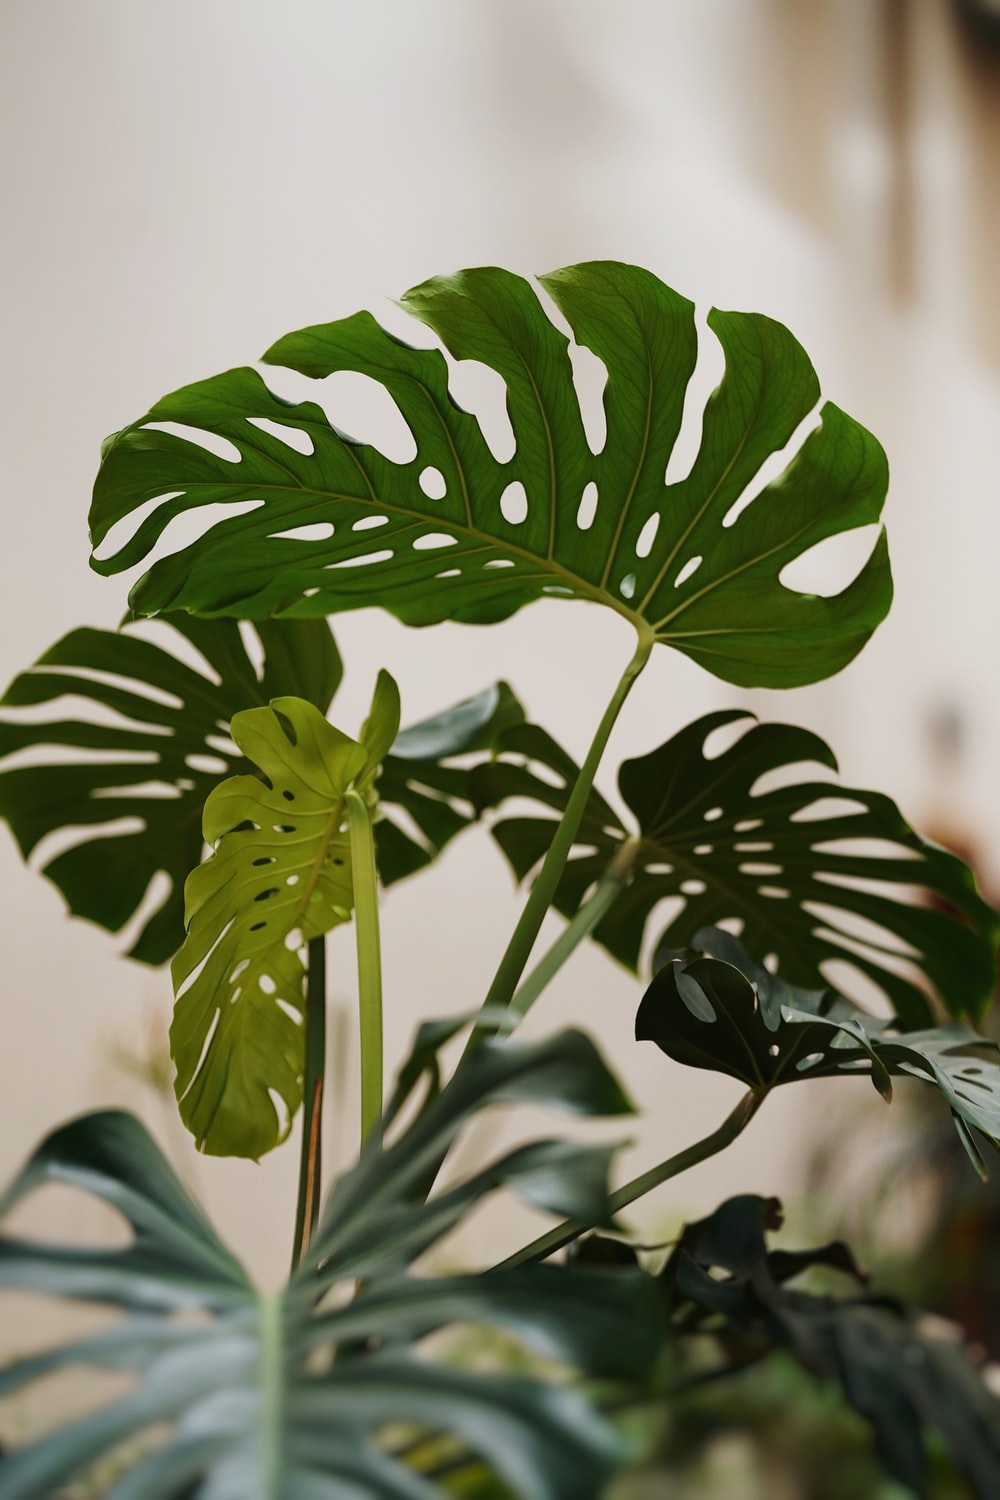 A plant with green leaves and stems - Monstera